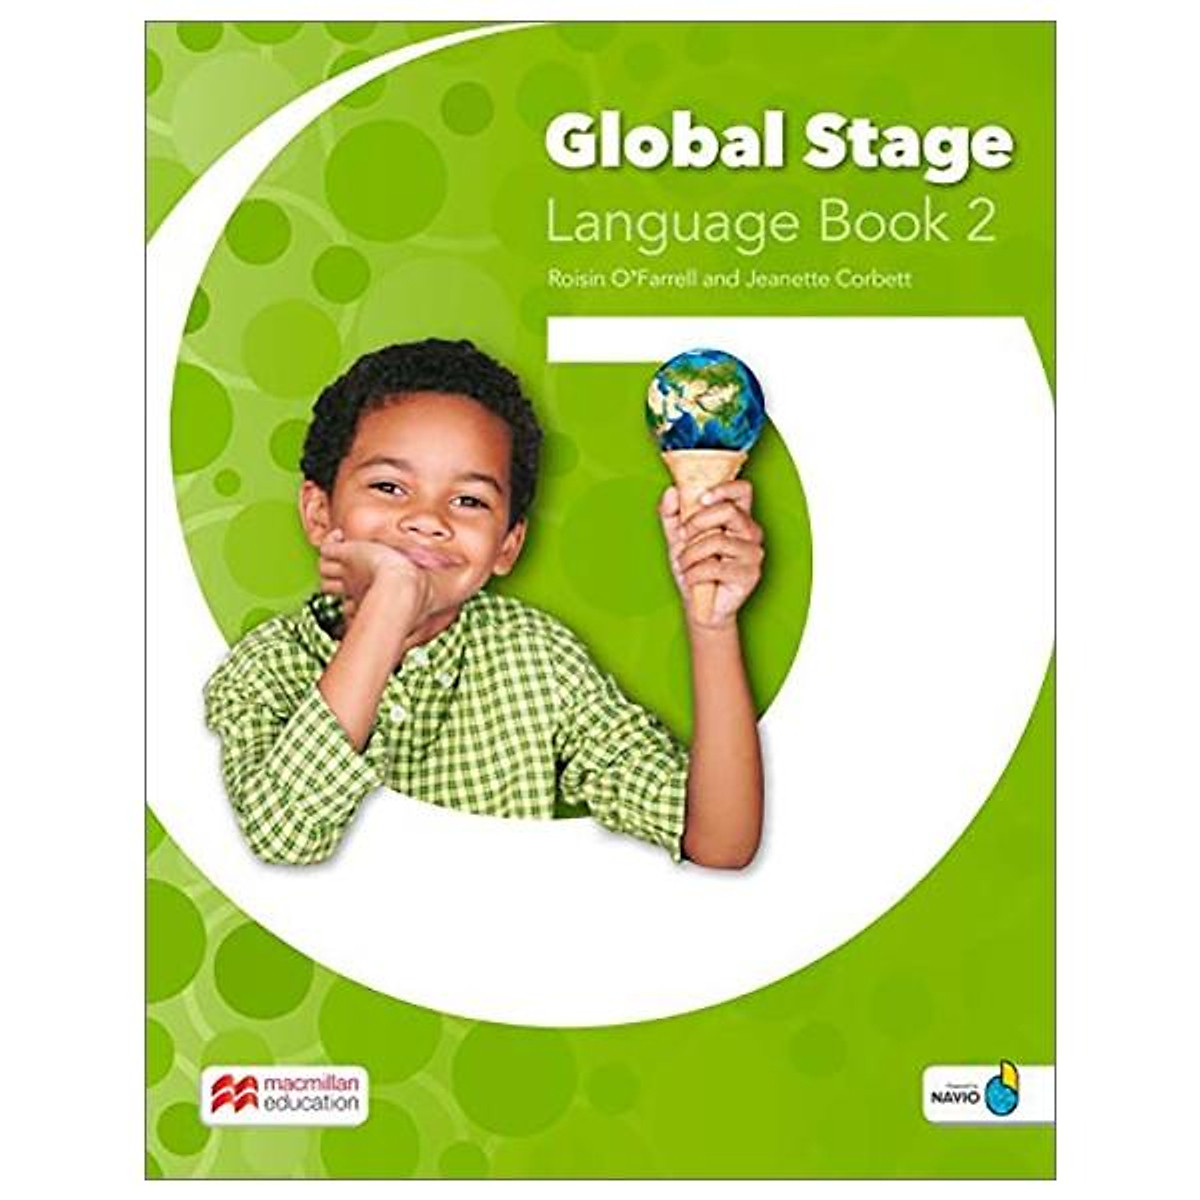 Global Stage Literacy Book And Language Book Level 2